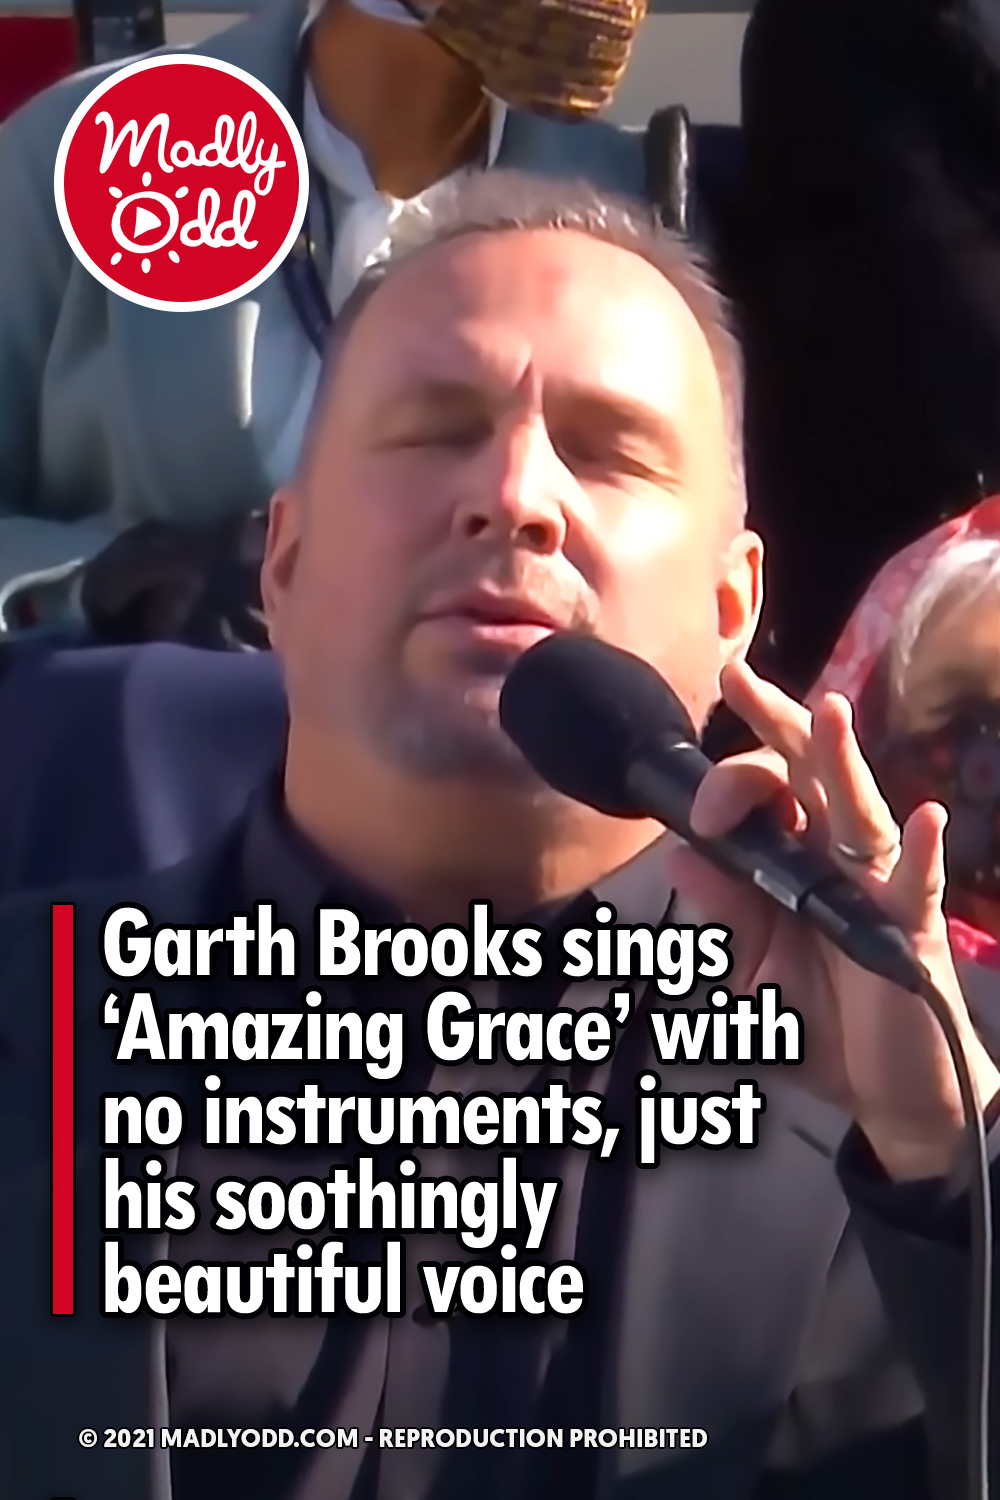 Garth Brooks sings ‘Amazing Grace’ with no instruments, just his soothingly beautiful voice